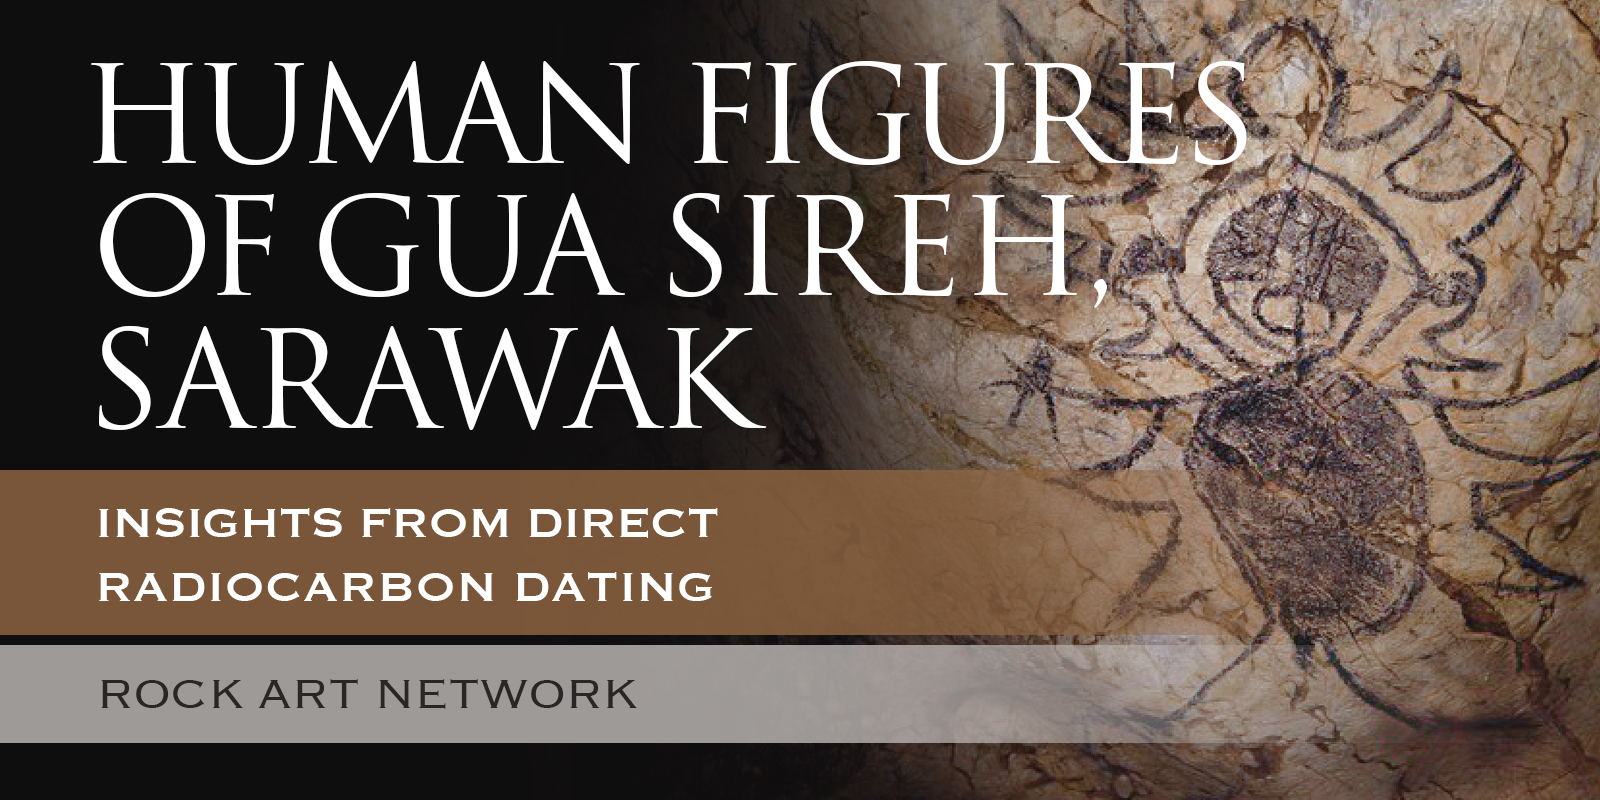 Rock art and frontier conflict in Southeast Asia: Insights from direct radiocarbon ages for the large human figures of Gua Sireh Sarawak